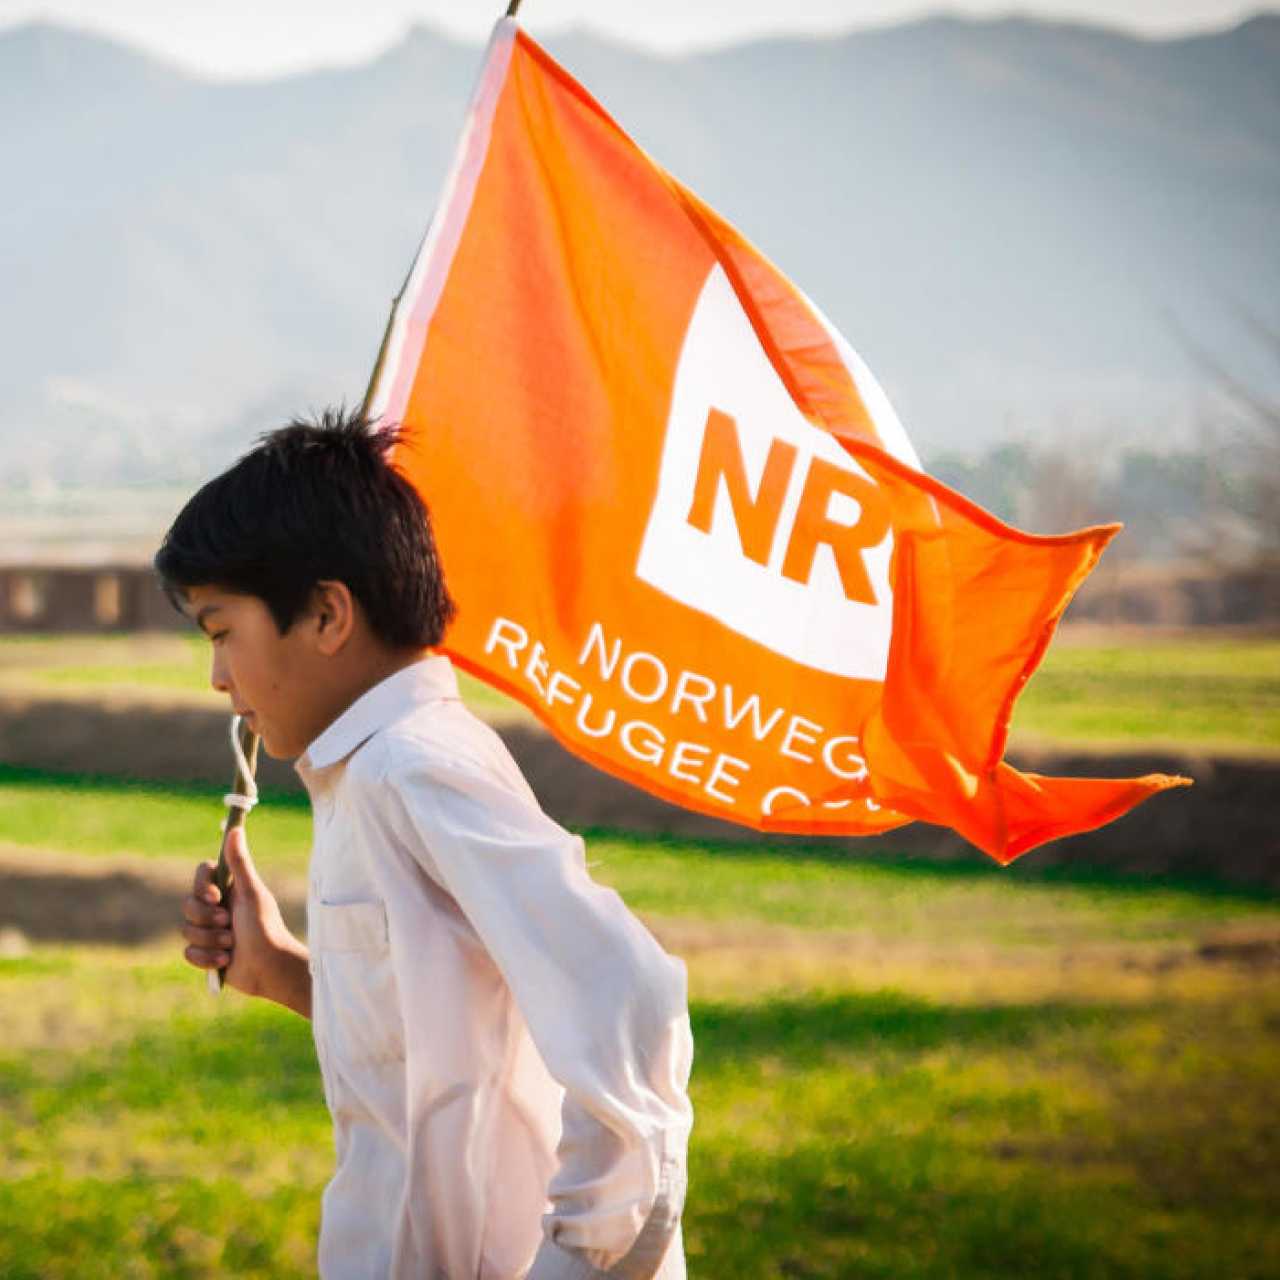 Child running in green field while holding orange Norwegian Refugee Council flag